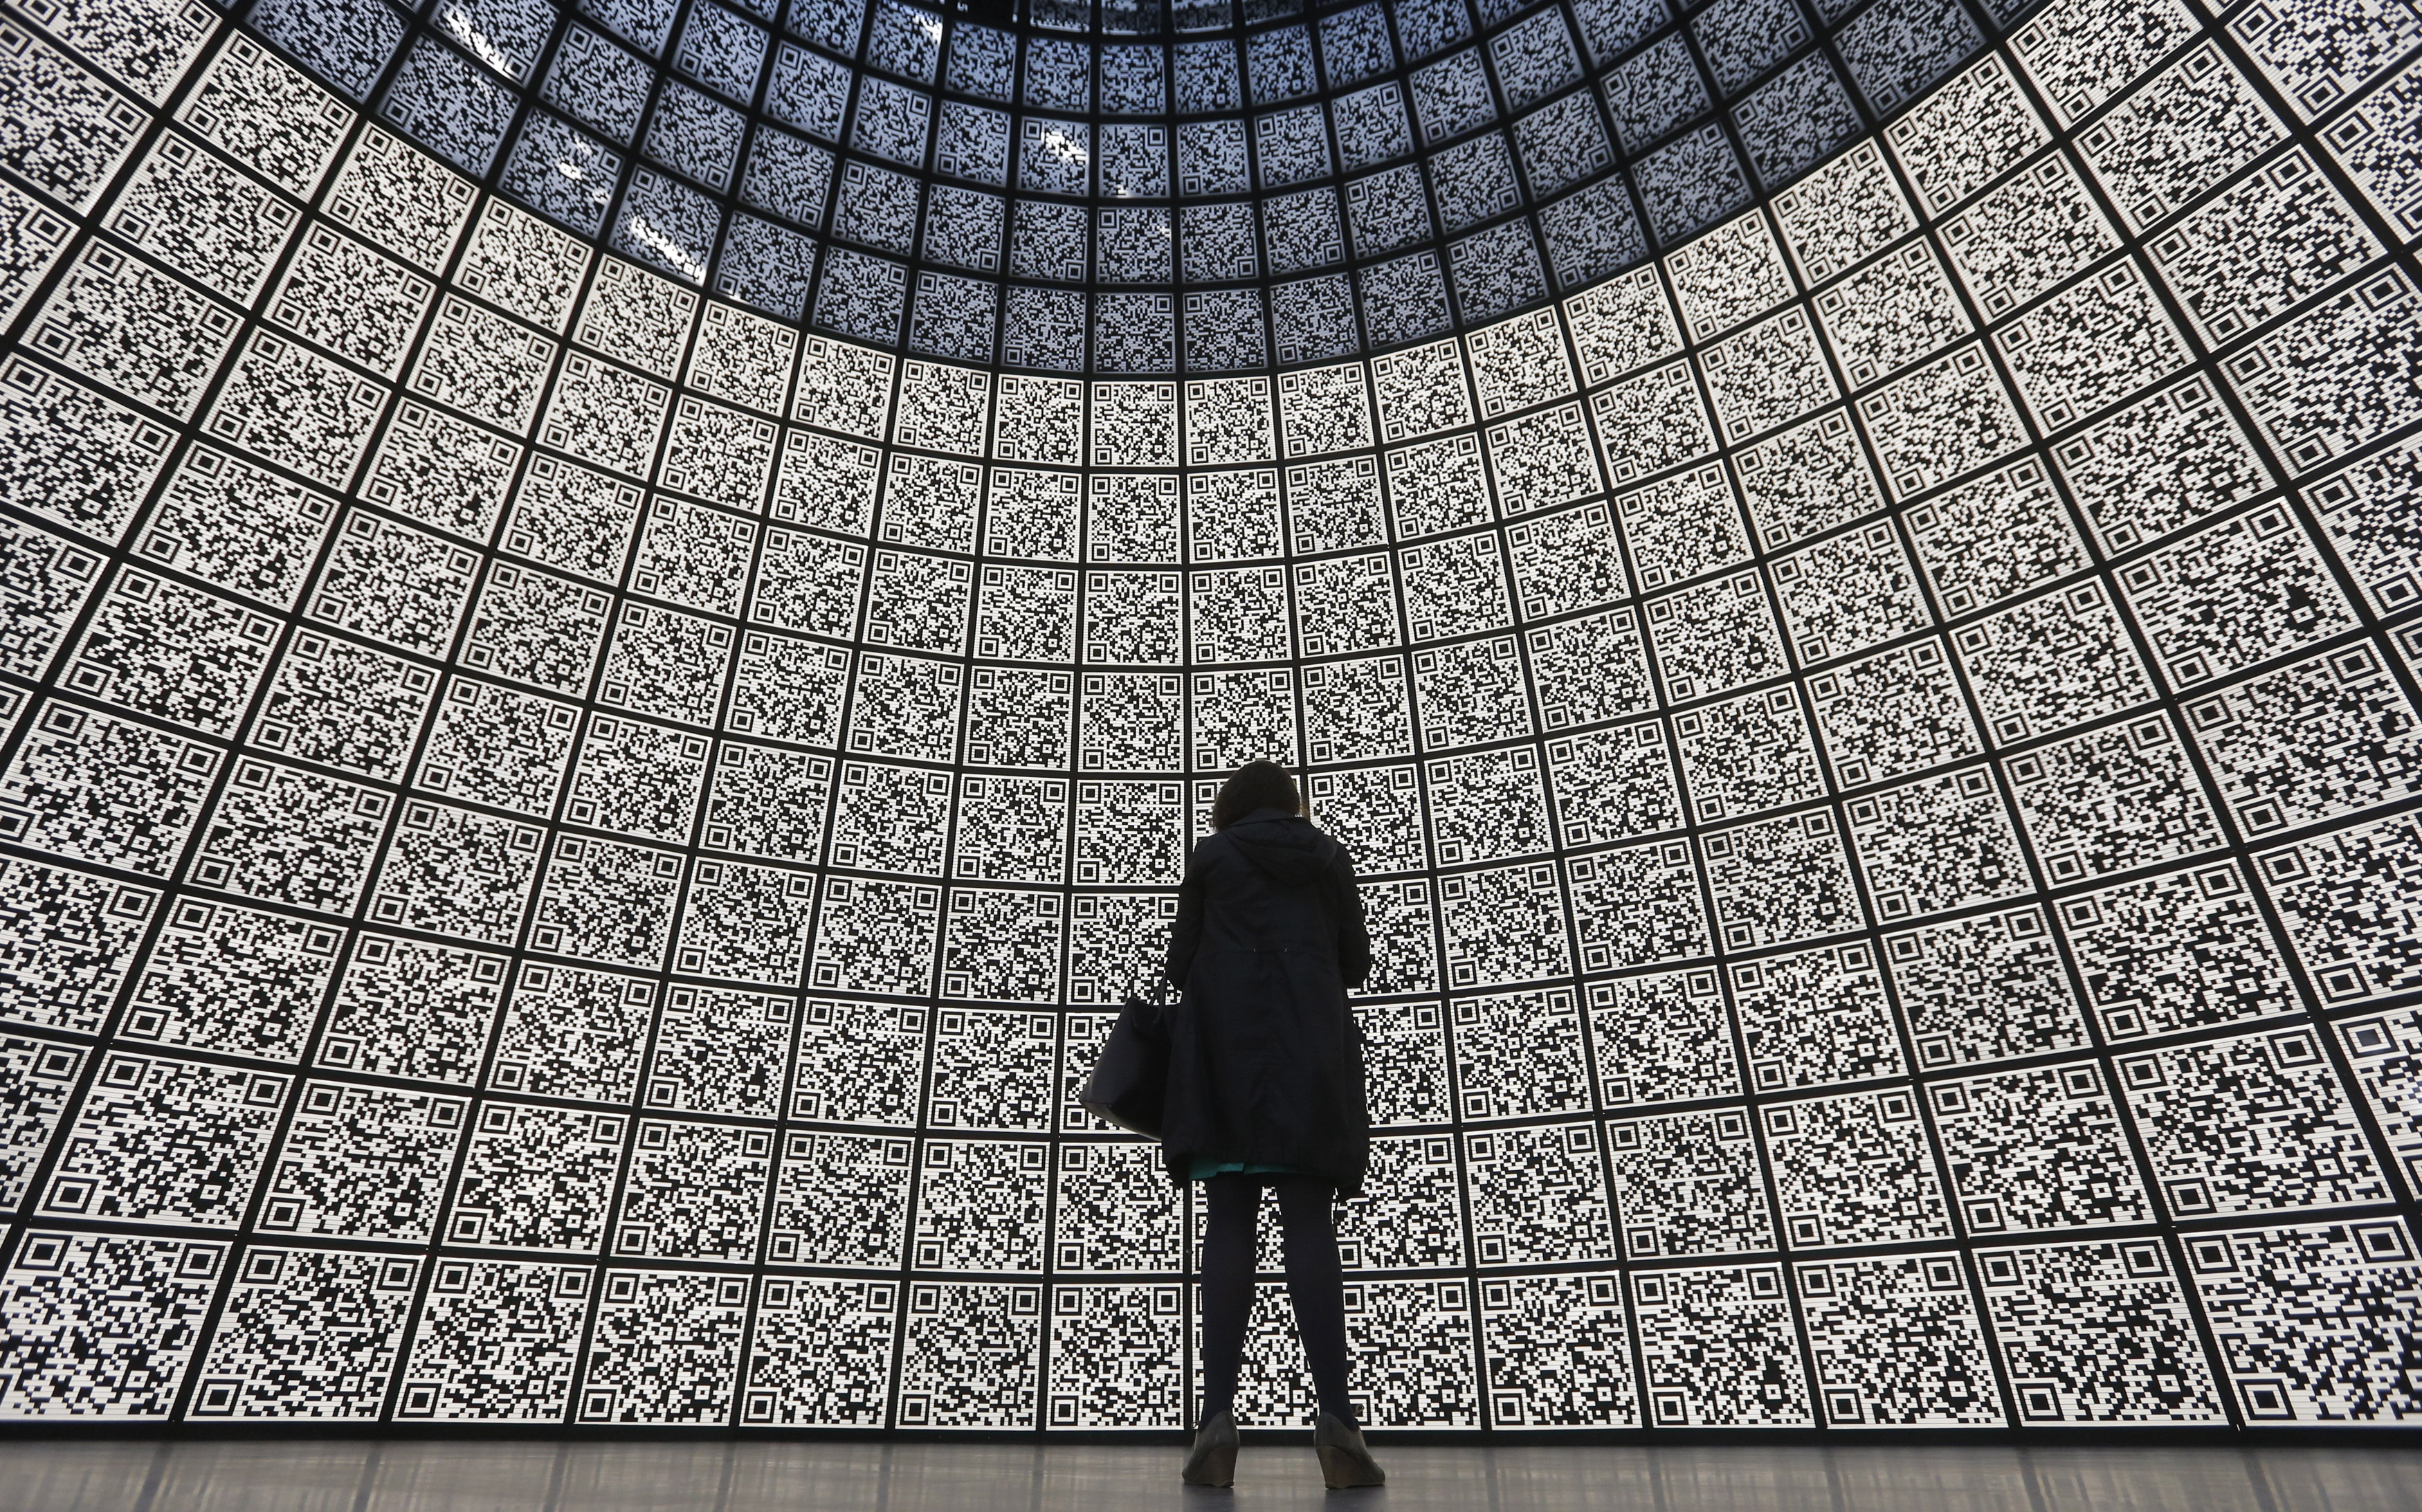 A visitor stands in front of QR-codes information panels during a ceremony to open an information showroom dedicated to the Zaryadye park project in central Moscow